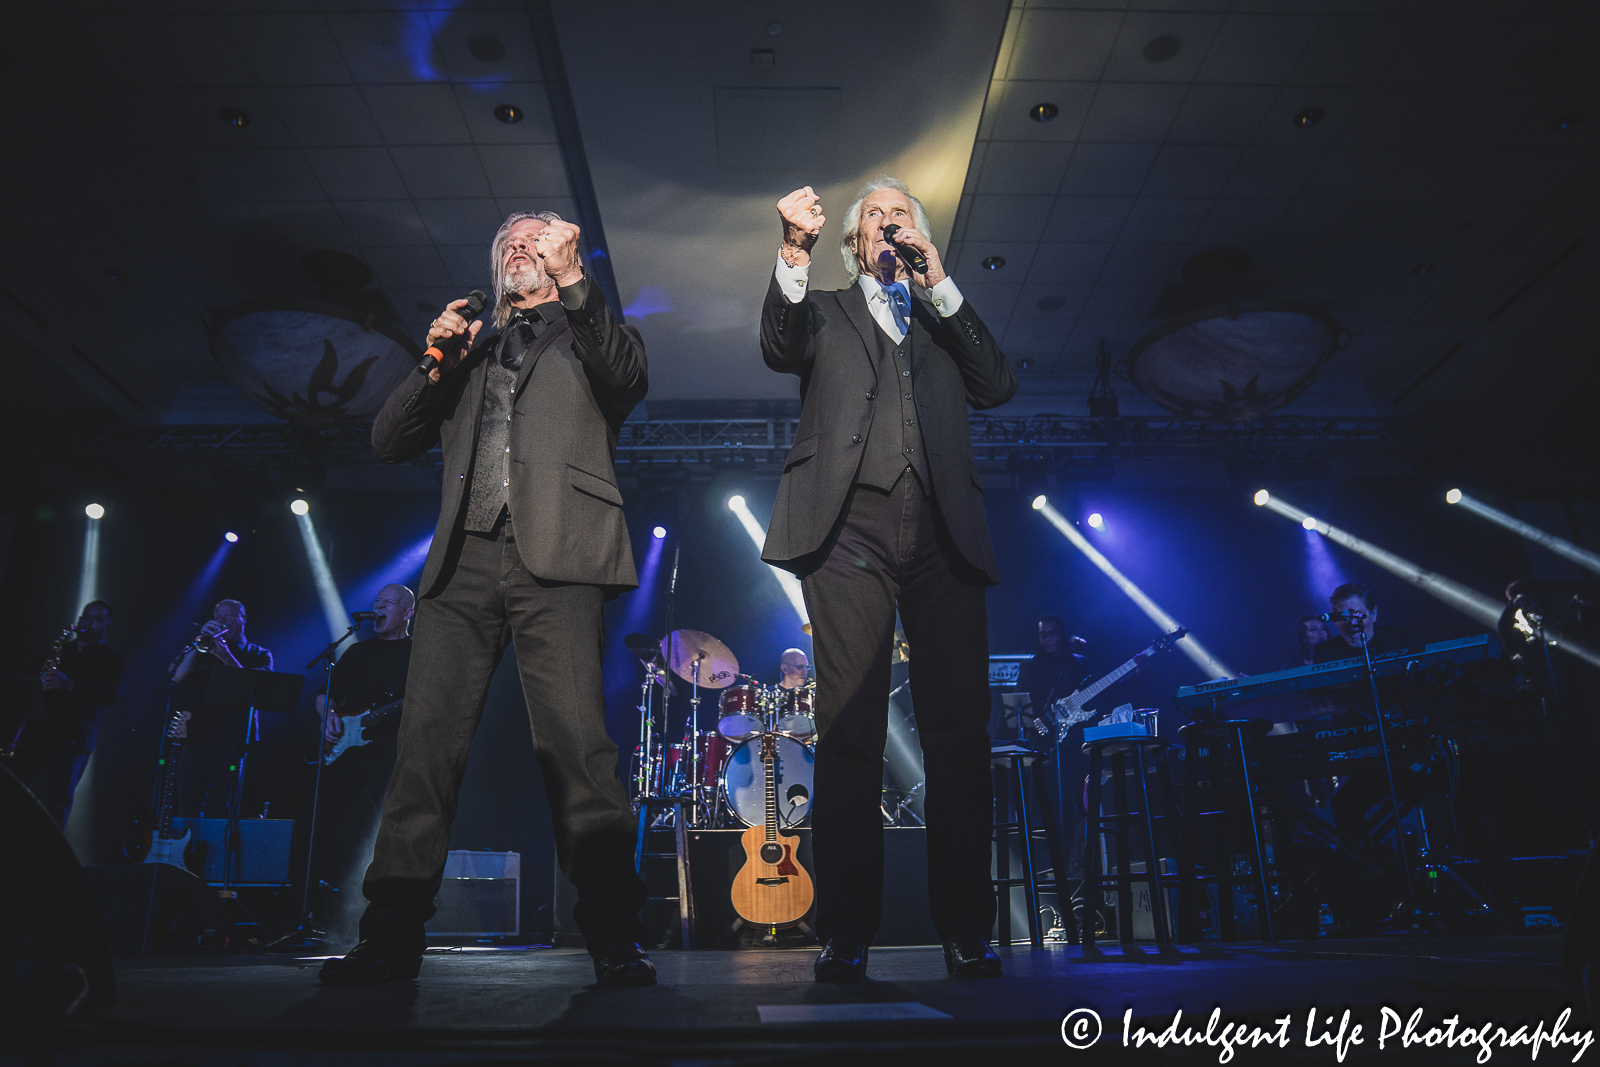 The Righteous Brothers duo of Bill Medley and Bucky Heard performing live at Prairie Band Casino in Mayetta, KS on June 29, 2023.